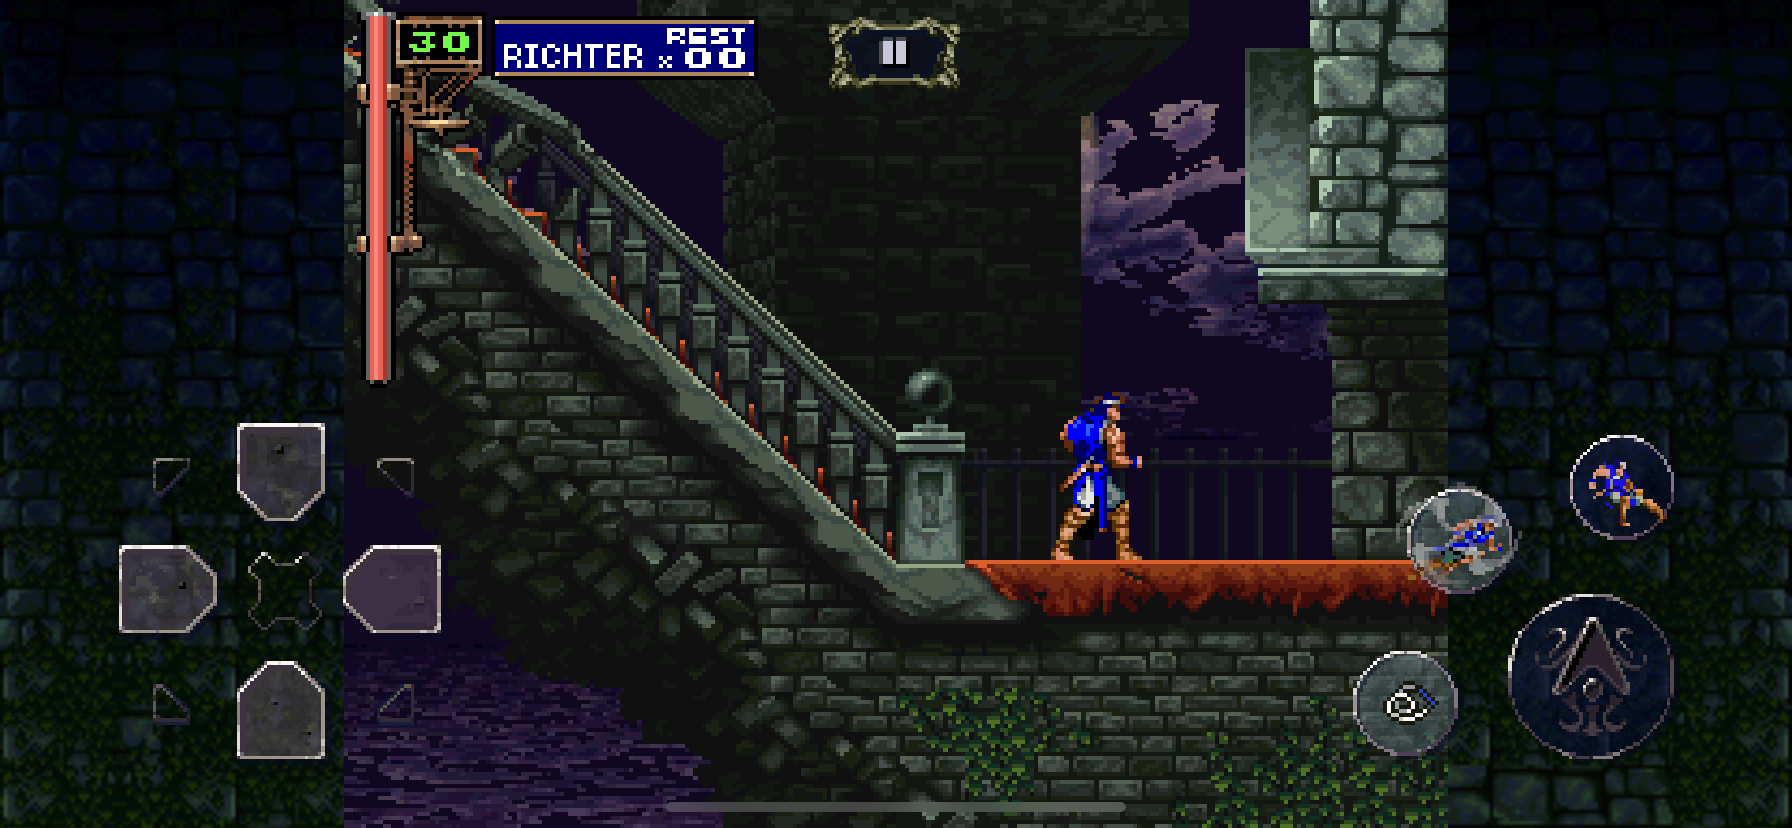 castlevania-symphony-of-the-night-is-now-available-on-ios-and-android-as-a-premium-port-with